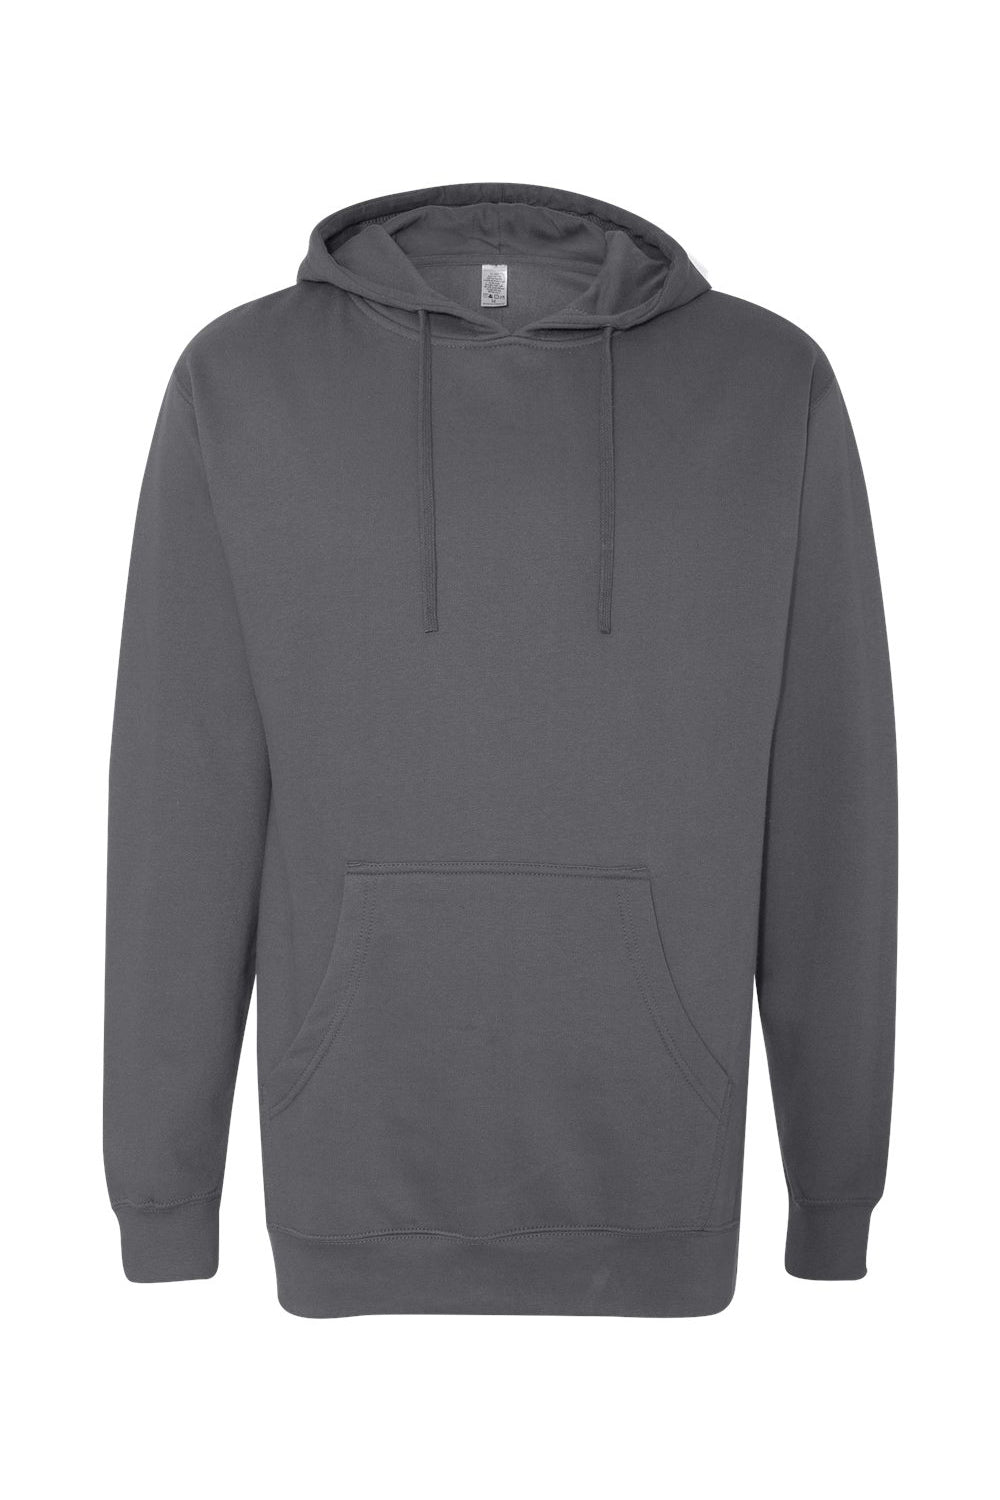 Independent Trading Co. SS4500 Mens Hooded Sweatshirt Hoodie Charcoal Grey Flat Front